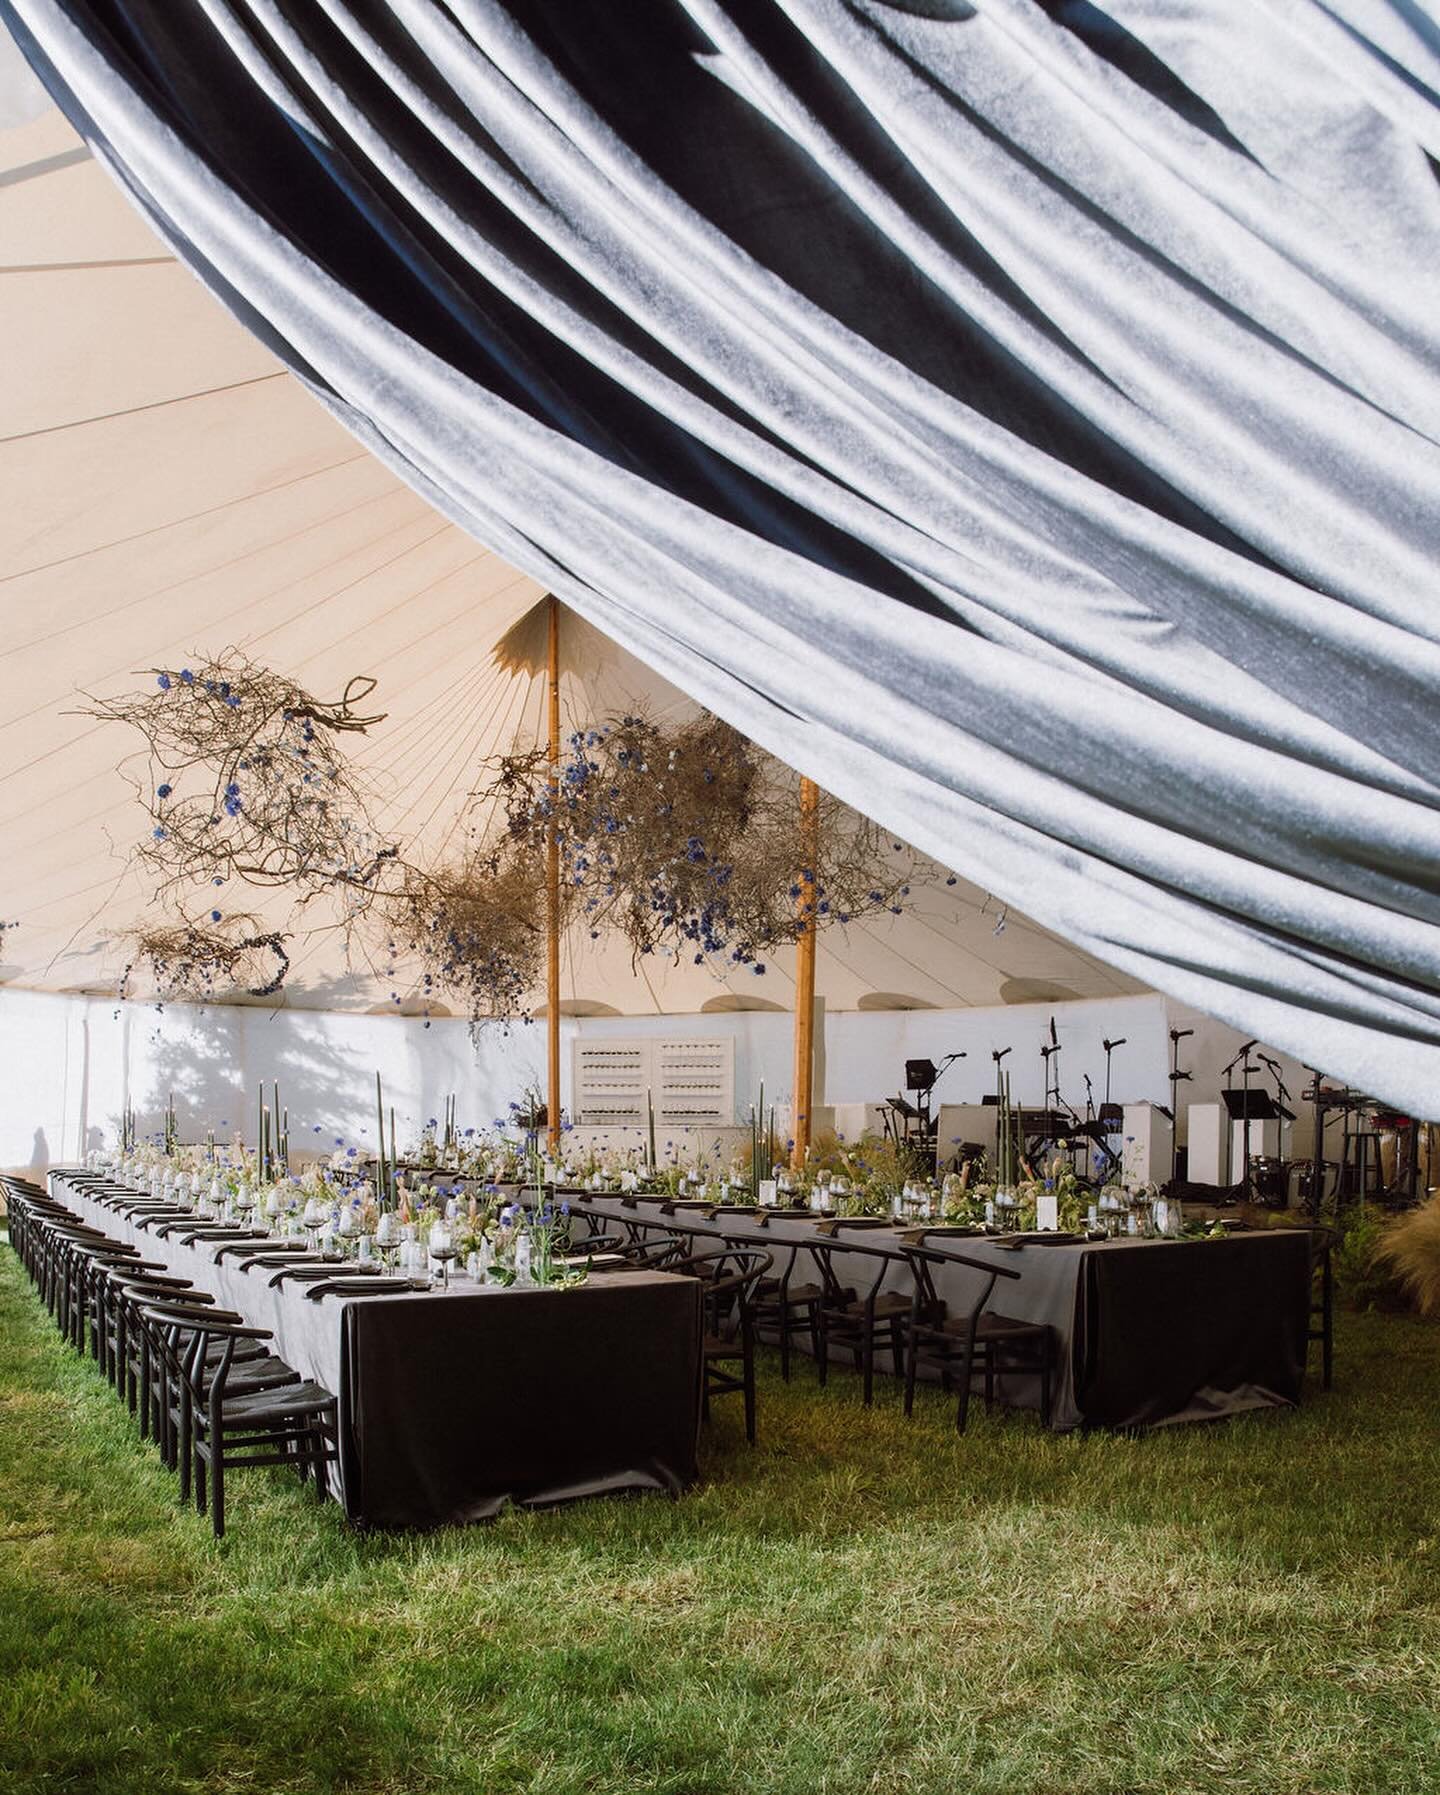 COME TO THE DARK SIDE.

A moody aesthetic created under tented ceilings, every dark detail was so gracefully exquisite we didn&rsquo;t even miss the color. There&rsquo;s something about matching glassware and a monochromatic tablescape that&rsquo;s e